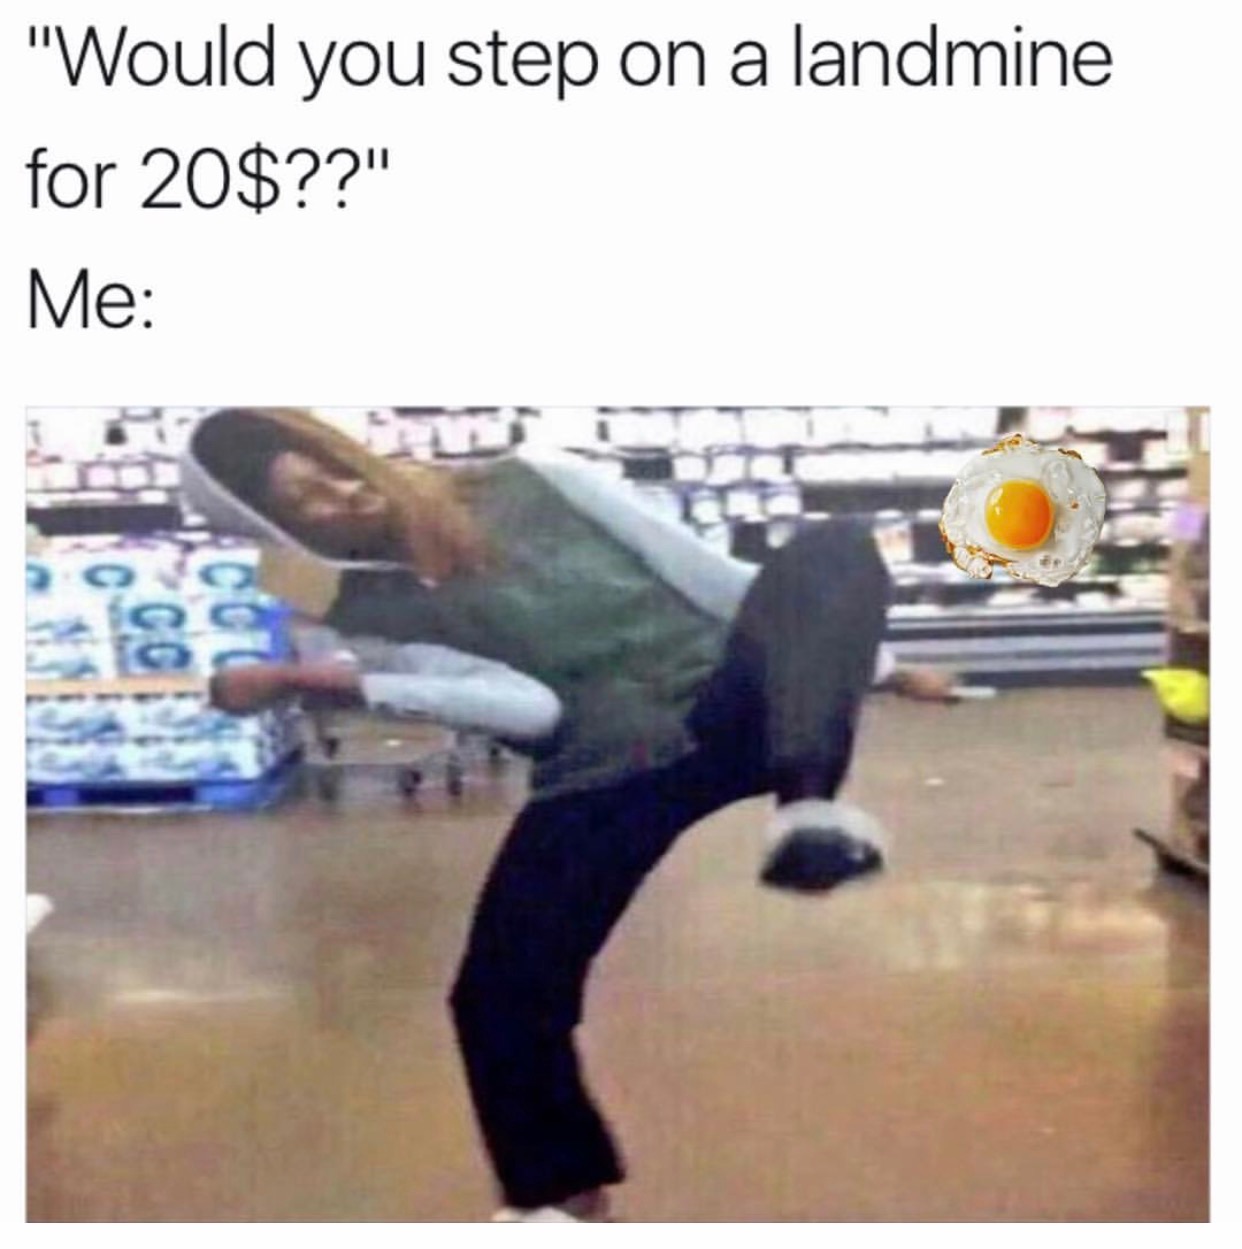 memes - would you step on a landmine for $20 - "Would you step on a landmine for 20$??" Me